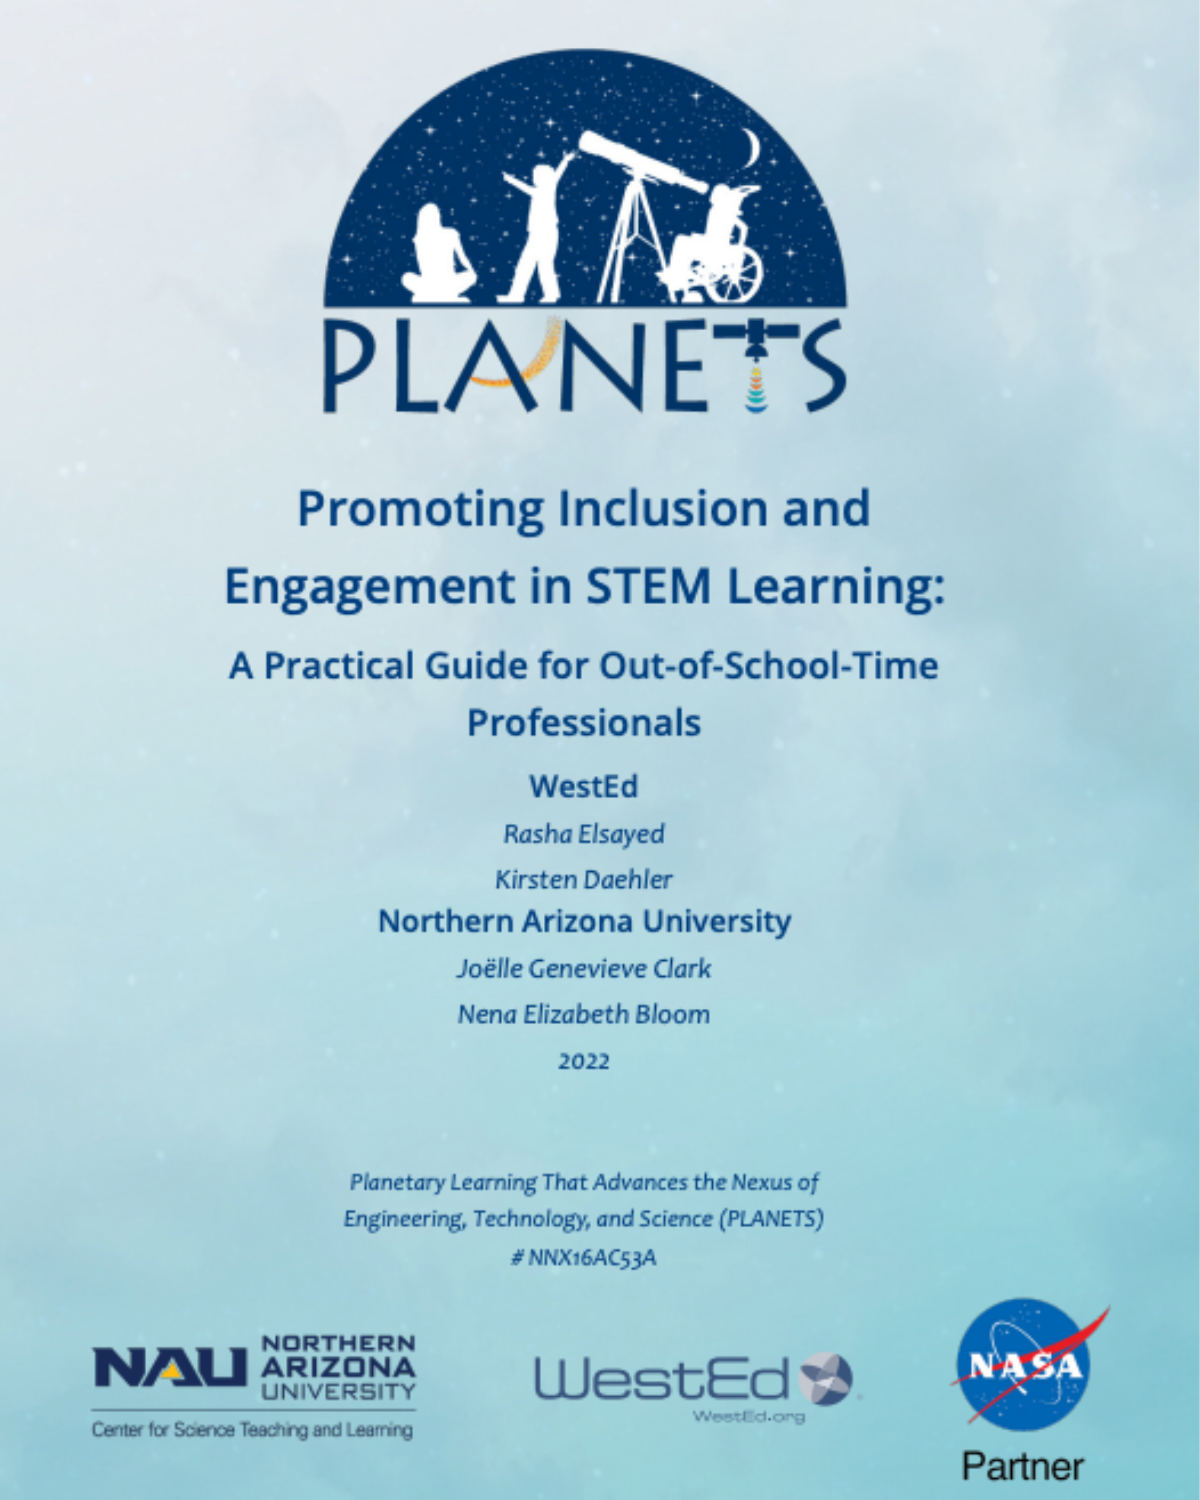 Promoting Inclusion and Engagement in STEM Learning: A Practical Guide for Out-of-School-Time Professionals